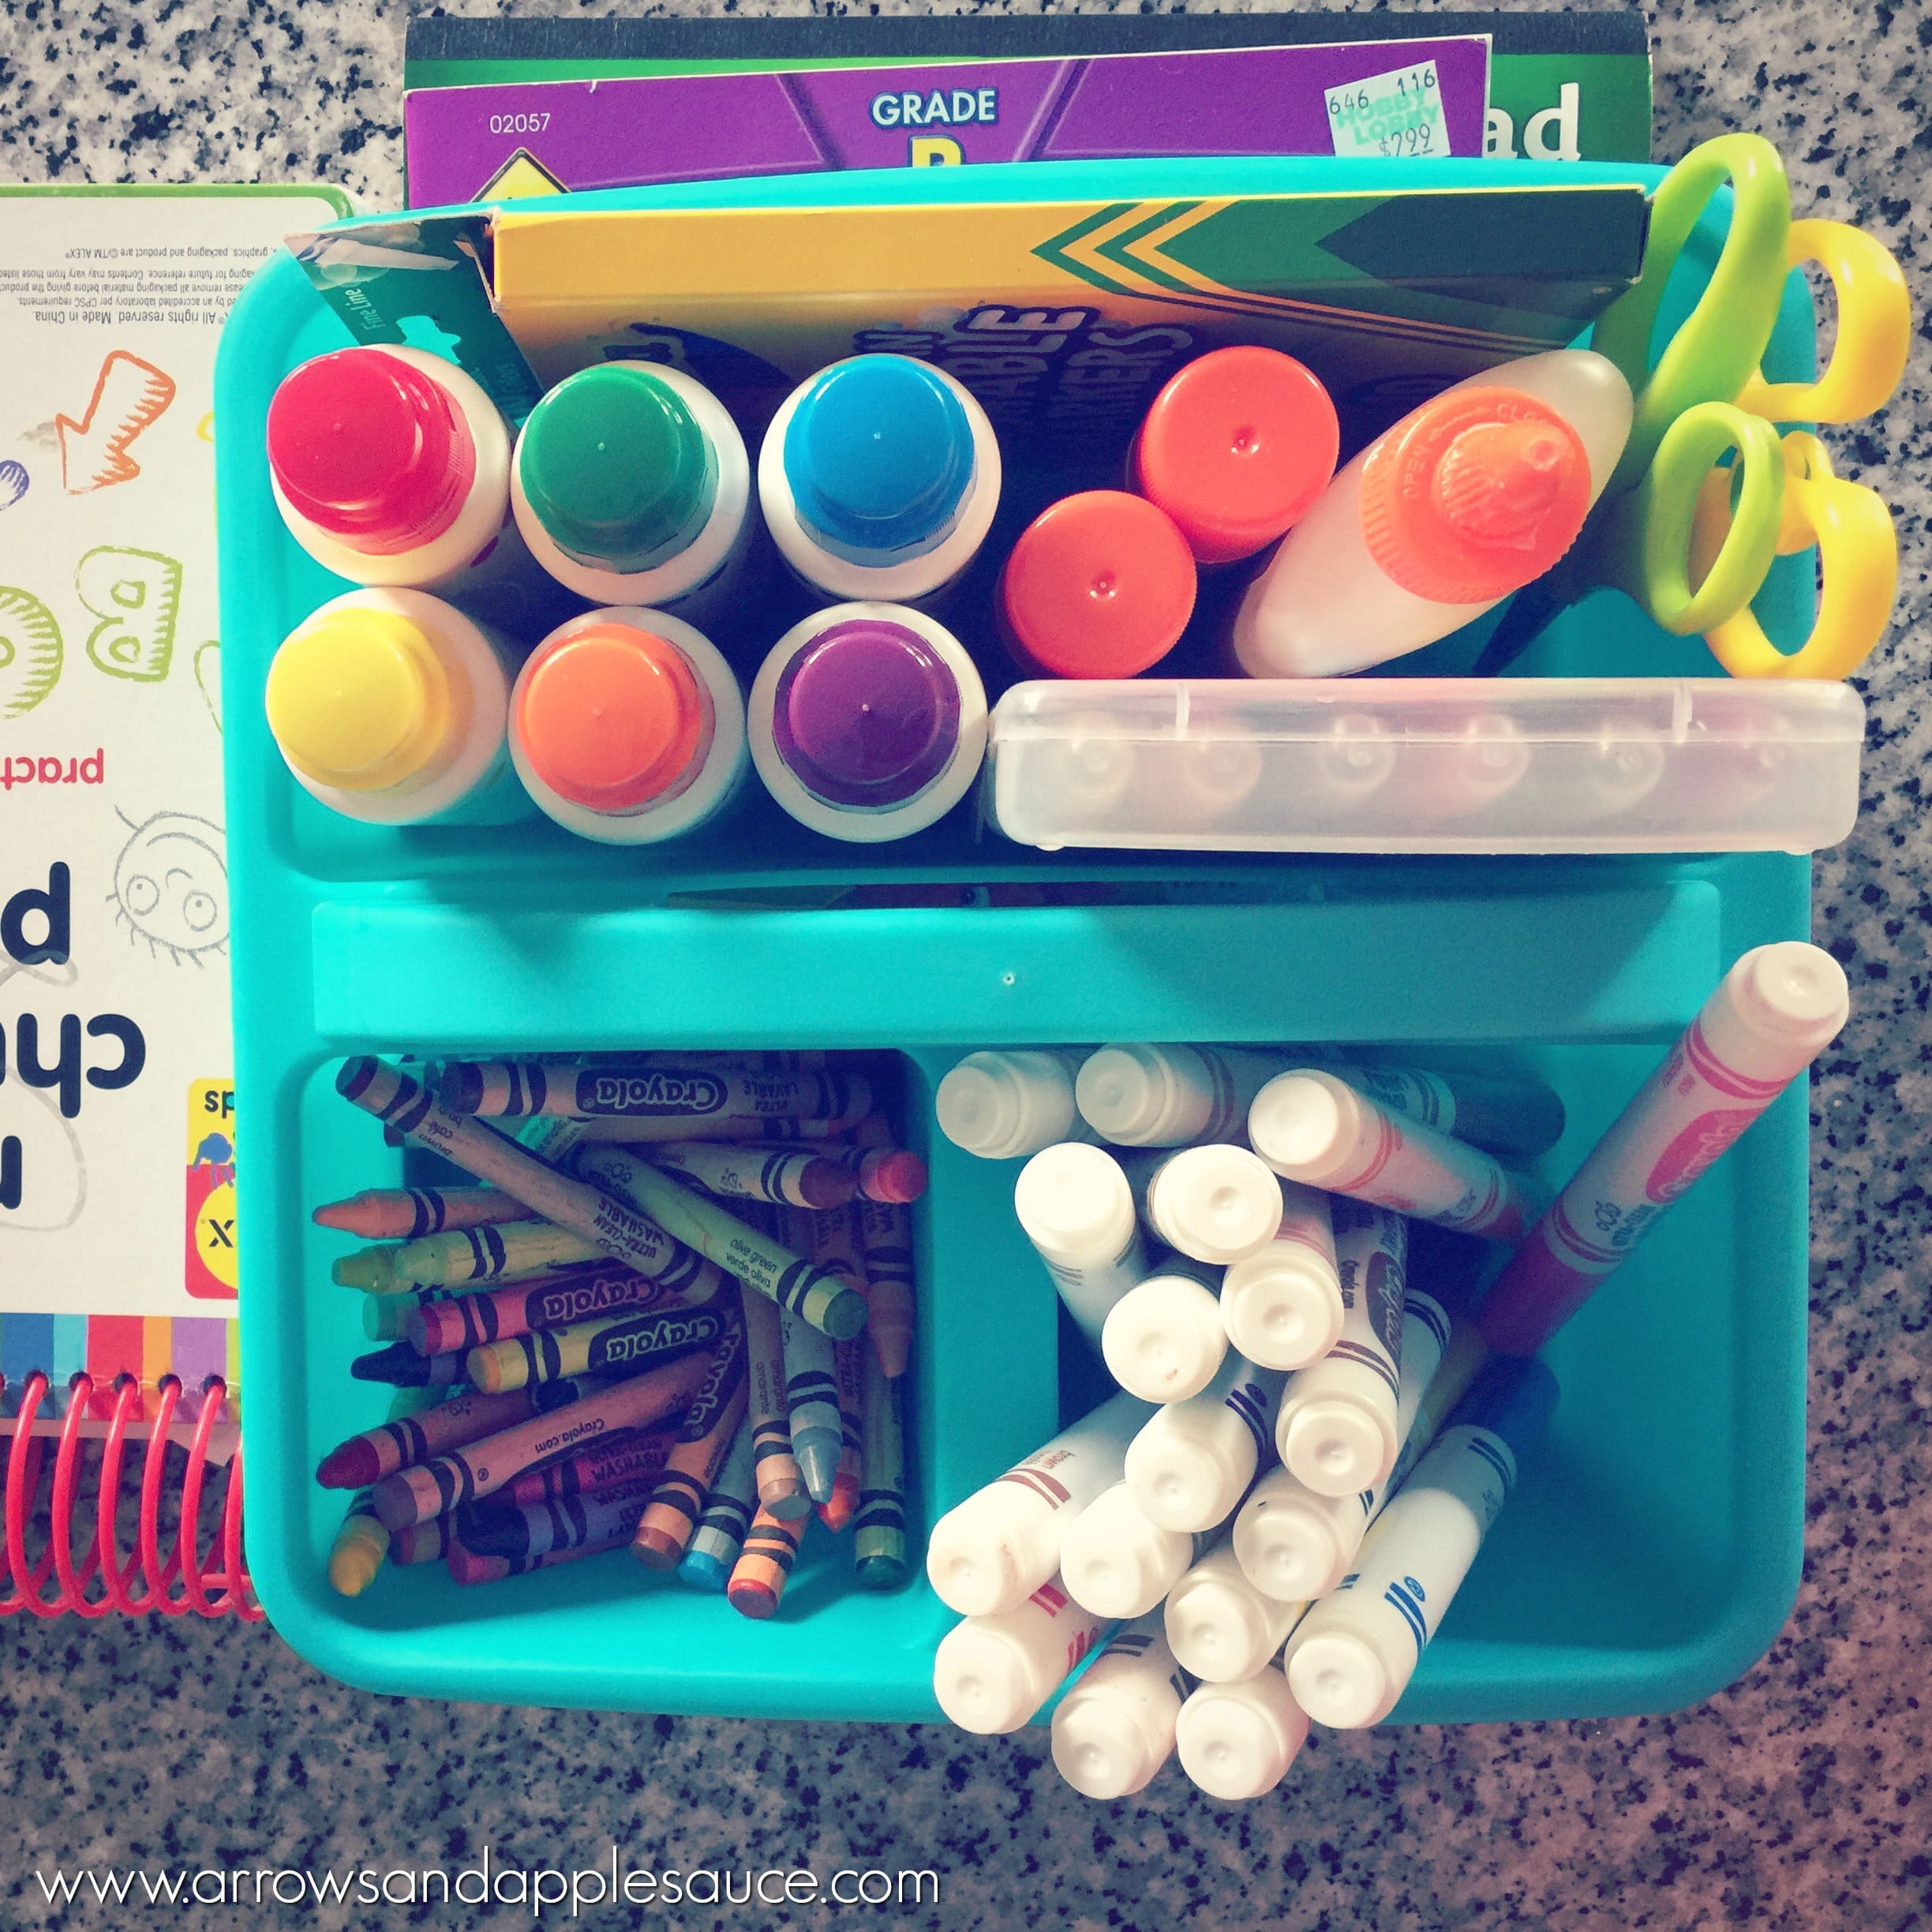 Even though I fully support learning through play at preschool age, there are still a few tools we just wouldn't want to be without. Click to learn more about our favorite homeschool preschool tools. #preschoolathome #homeschoolpreschool #musthaves #doadot #snapcubes #kidsart #hopscotch #sidewalkchalk #learnthroughplay #kidsbooks #schoolsupplies #preschooltools #educationaltoys